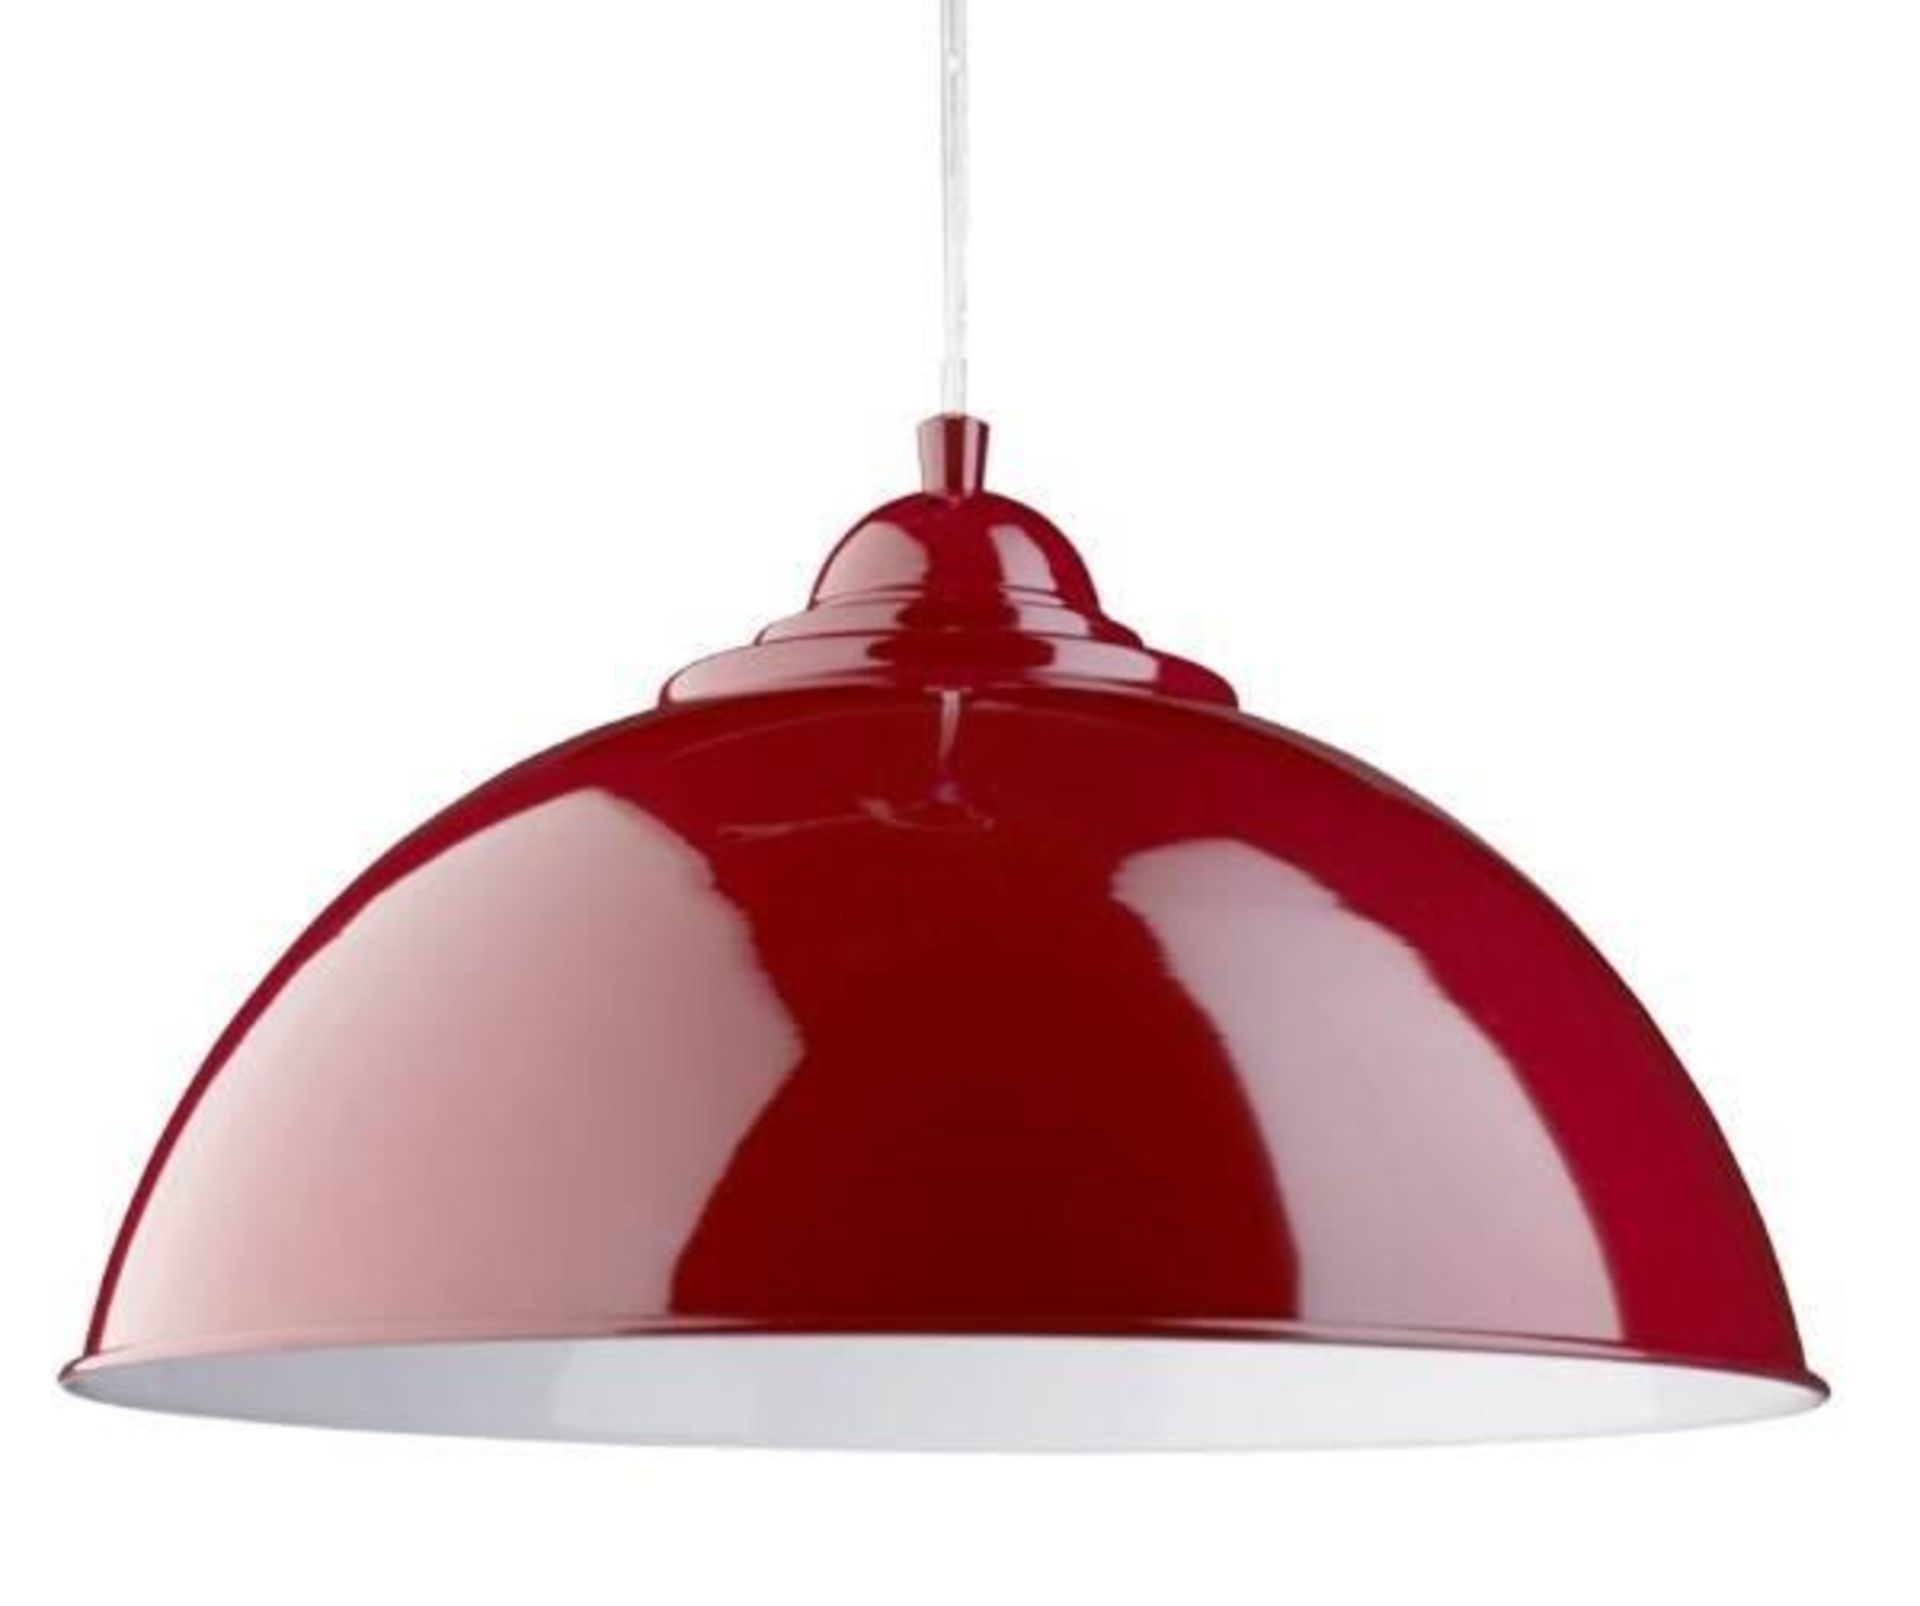 1 x SANFORD Red Half Dome Metal Pendant Light With White Inner - 34cm Diameter - New Boxed Stock - C - Image 2 of 4